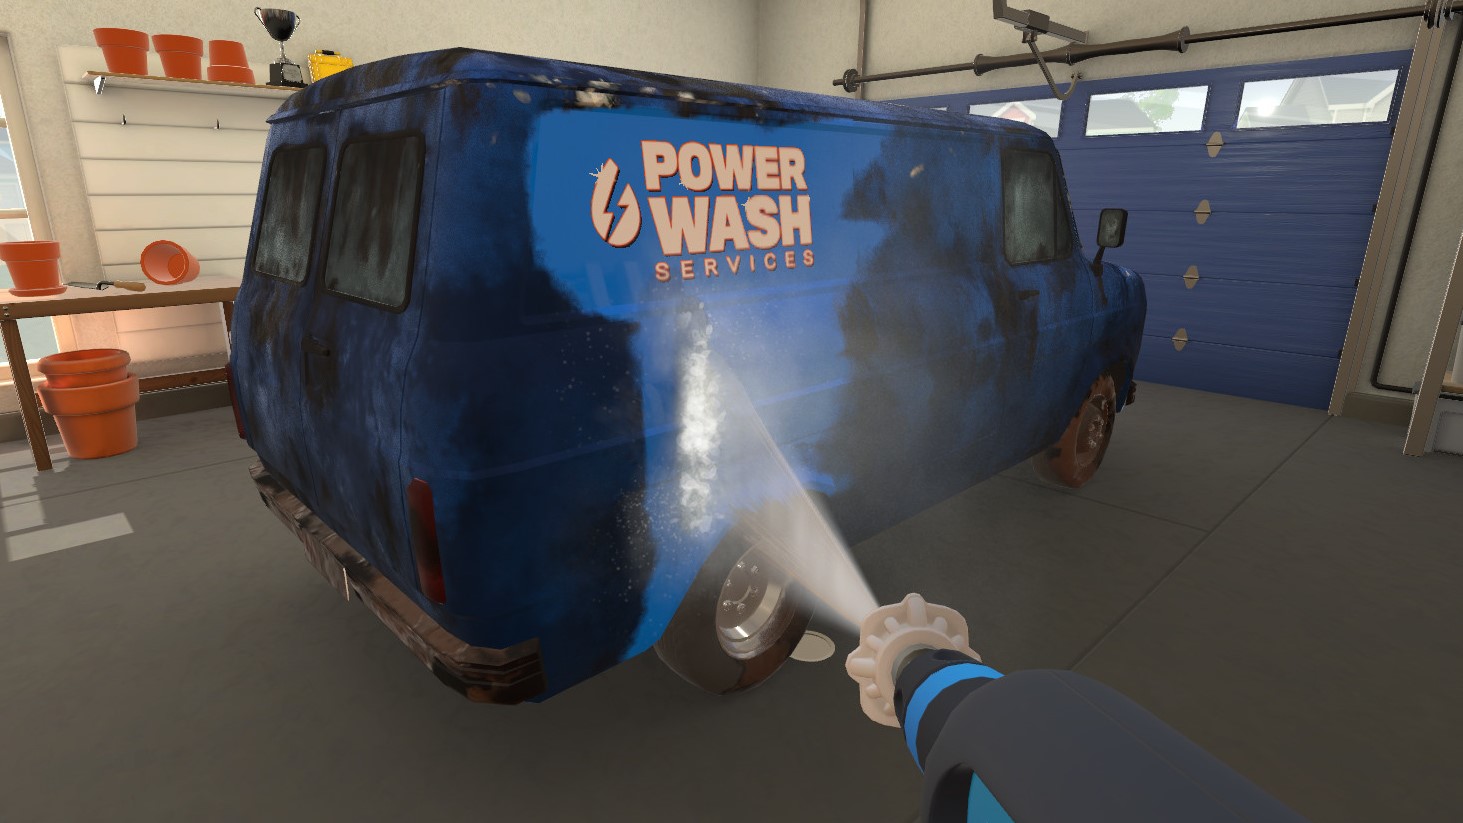 PowerWash Simulator VR coming to Meta Quest - but not PSVR 2 - this year